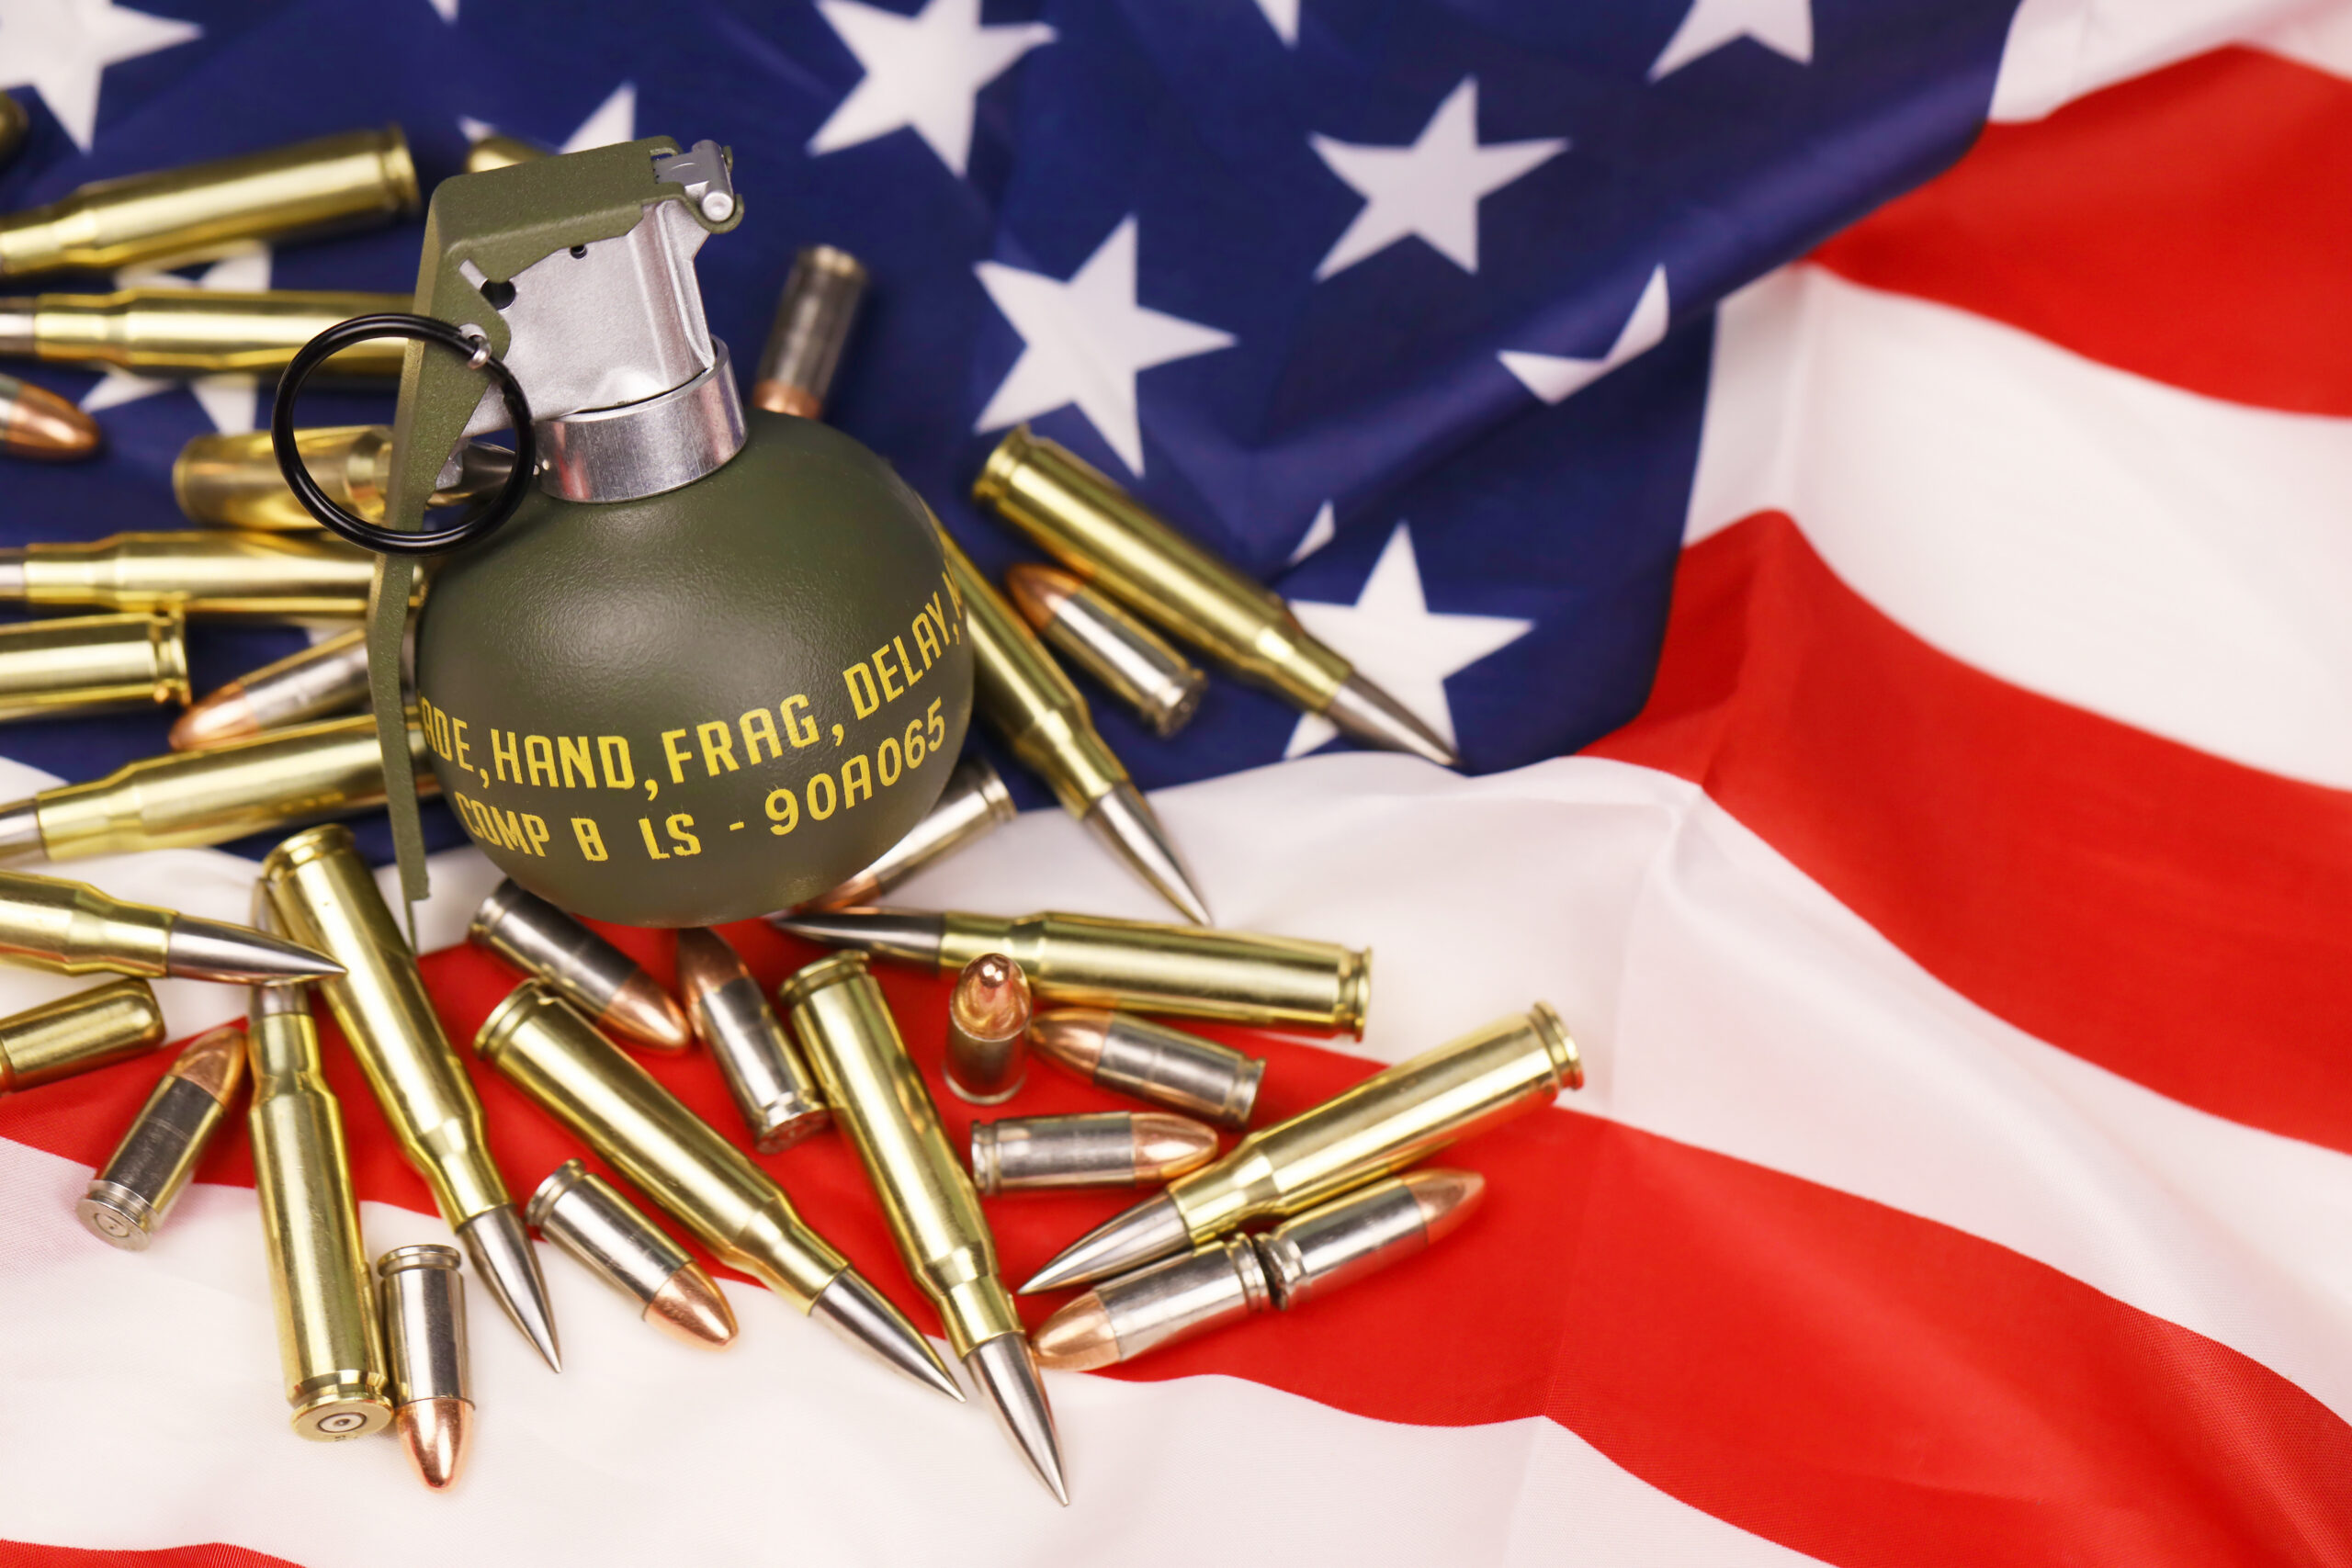 M67 frag grenade and many yellow bullets and cartridges on United States flag. Concept of gun trafficking on USA territory or special operations